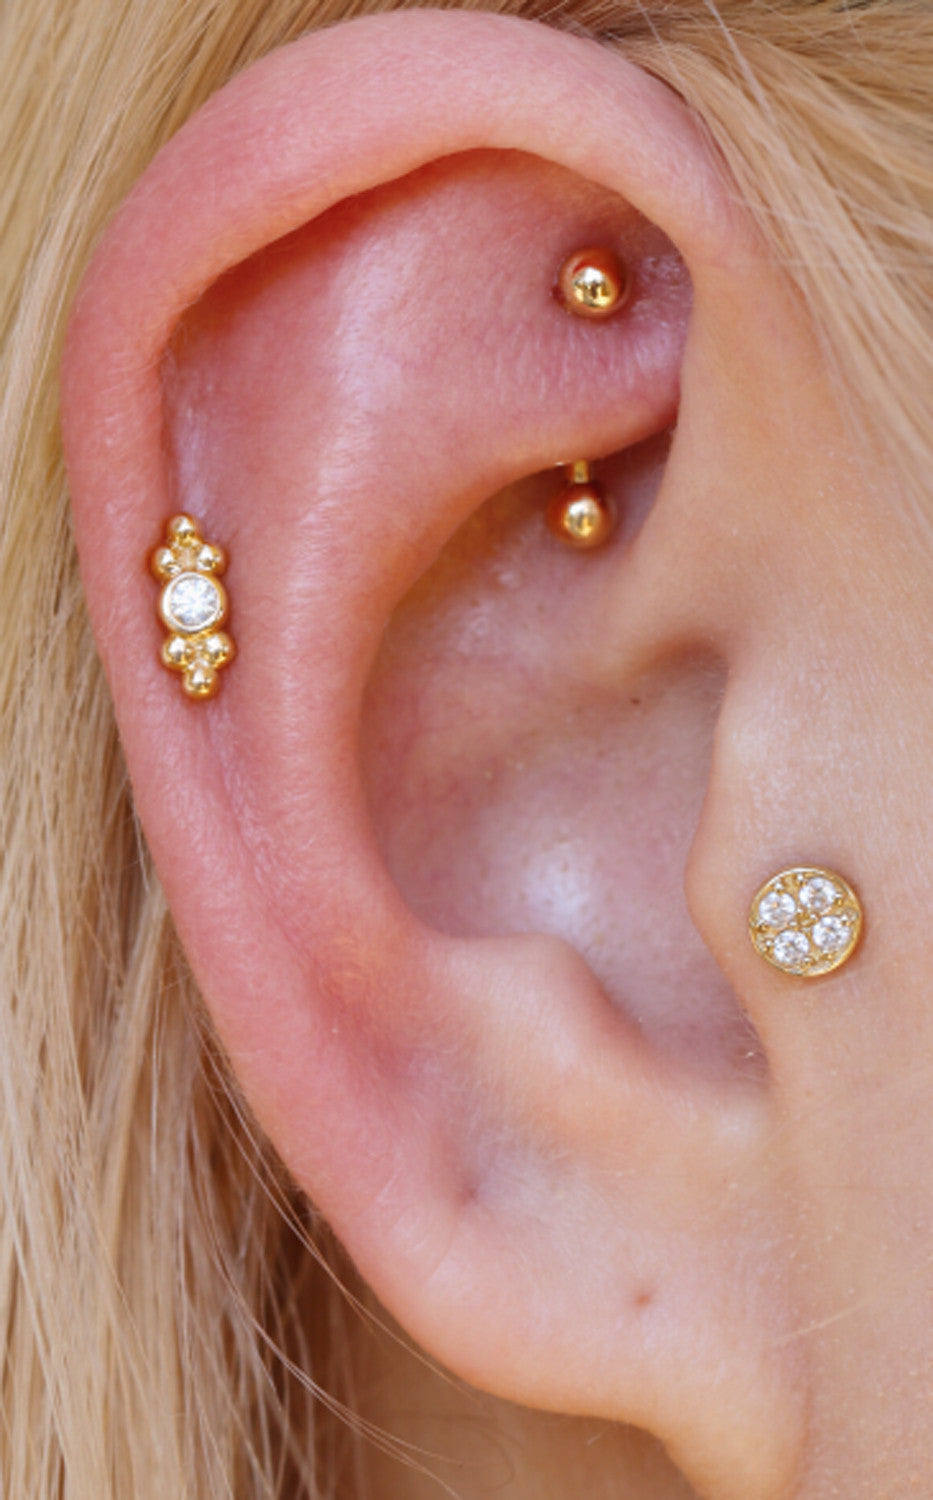 Delicate Ear Piercing Ideas at MyBodiArt.com - Gold Rook Barbell - Crystal Pinna Cartilage Helix Earring - Tribal Tragus Stud 